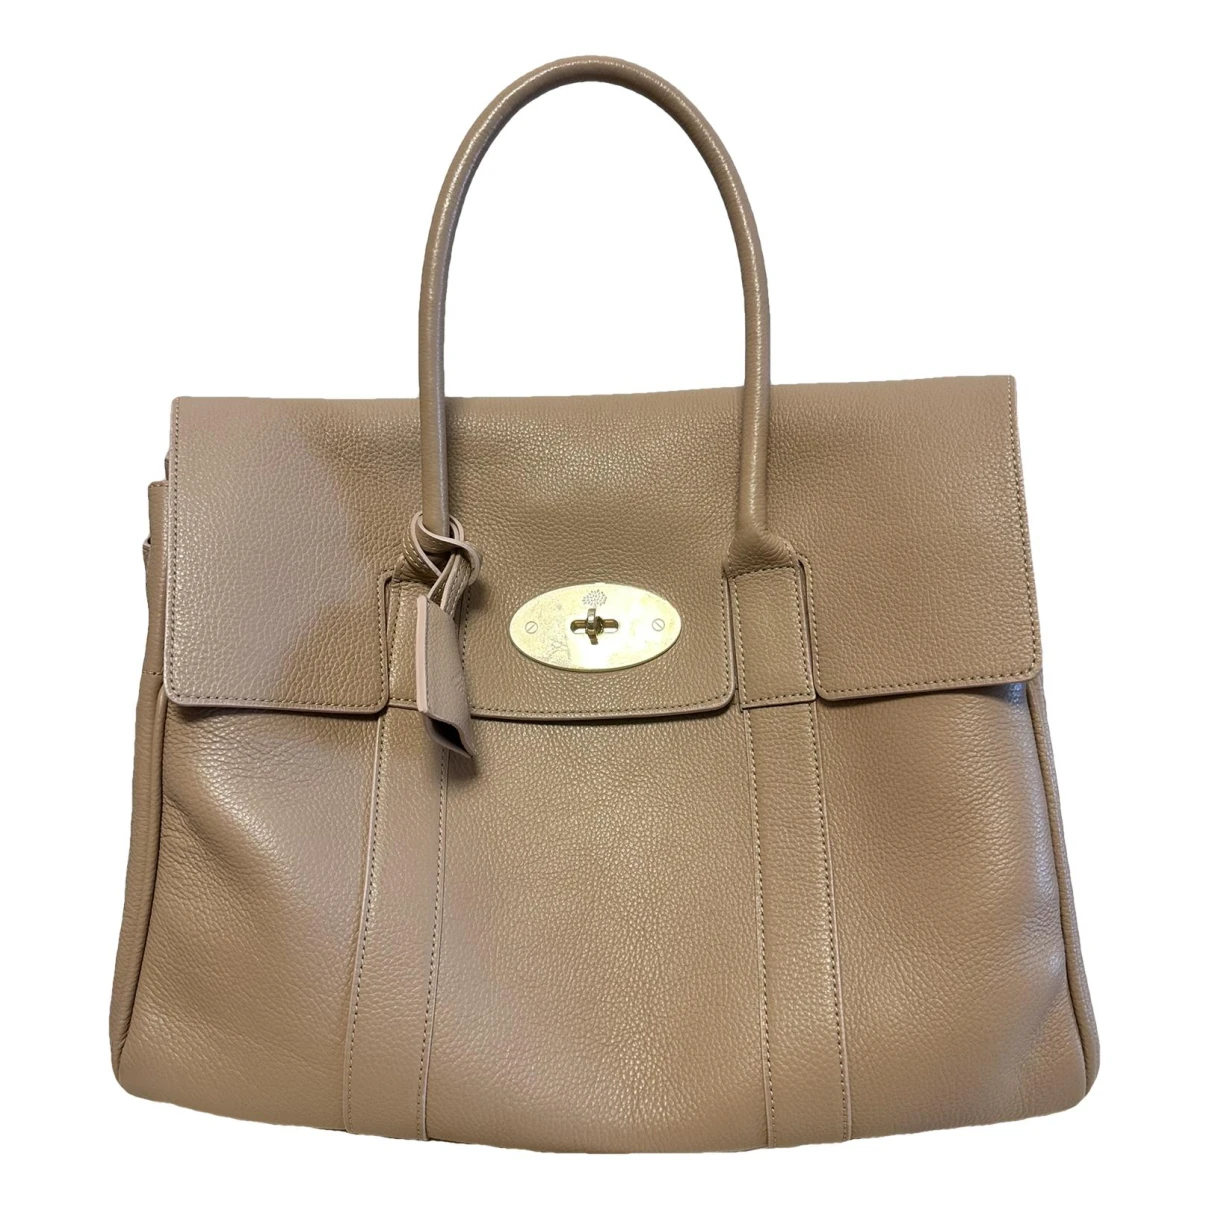 Pre-owned Mulberry Bayswater Leather Handbag In Beige